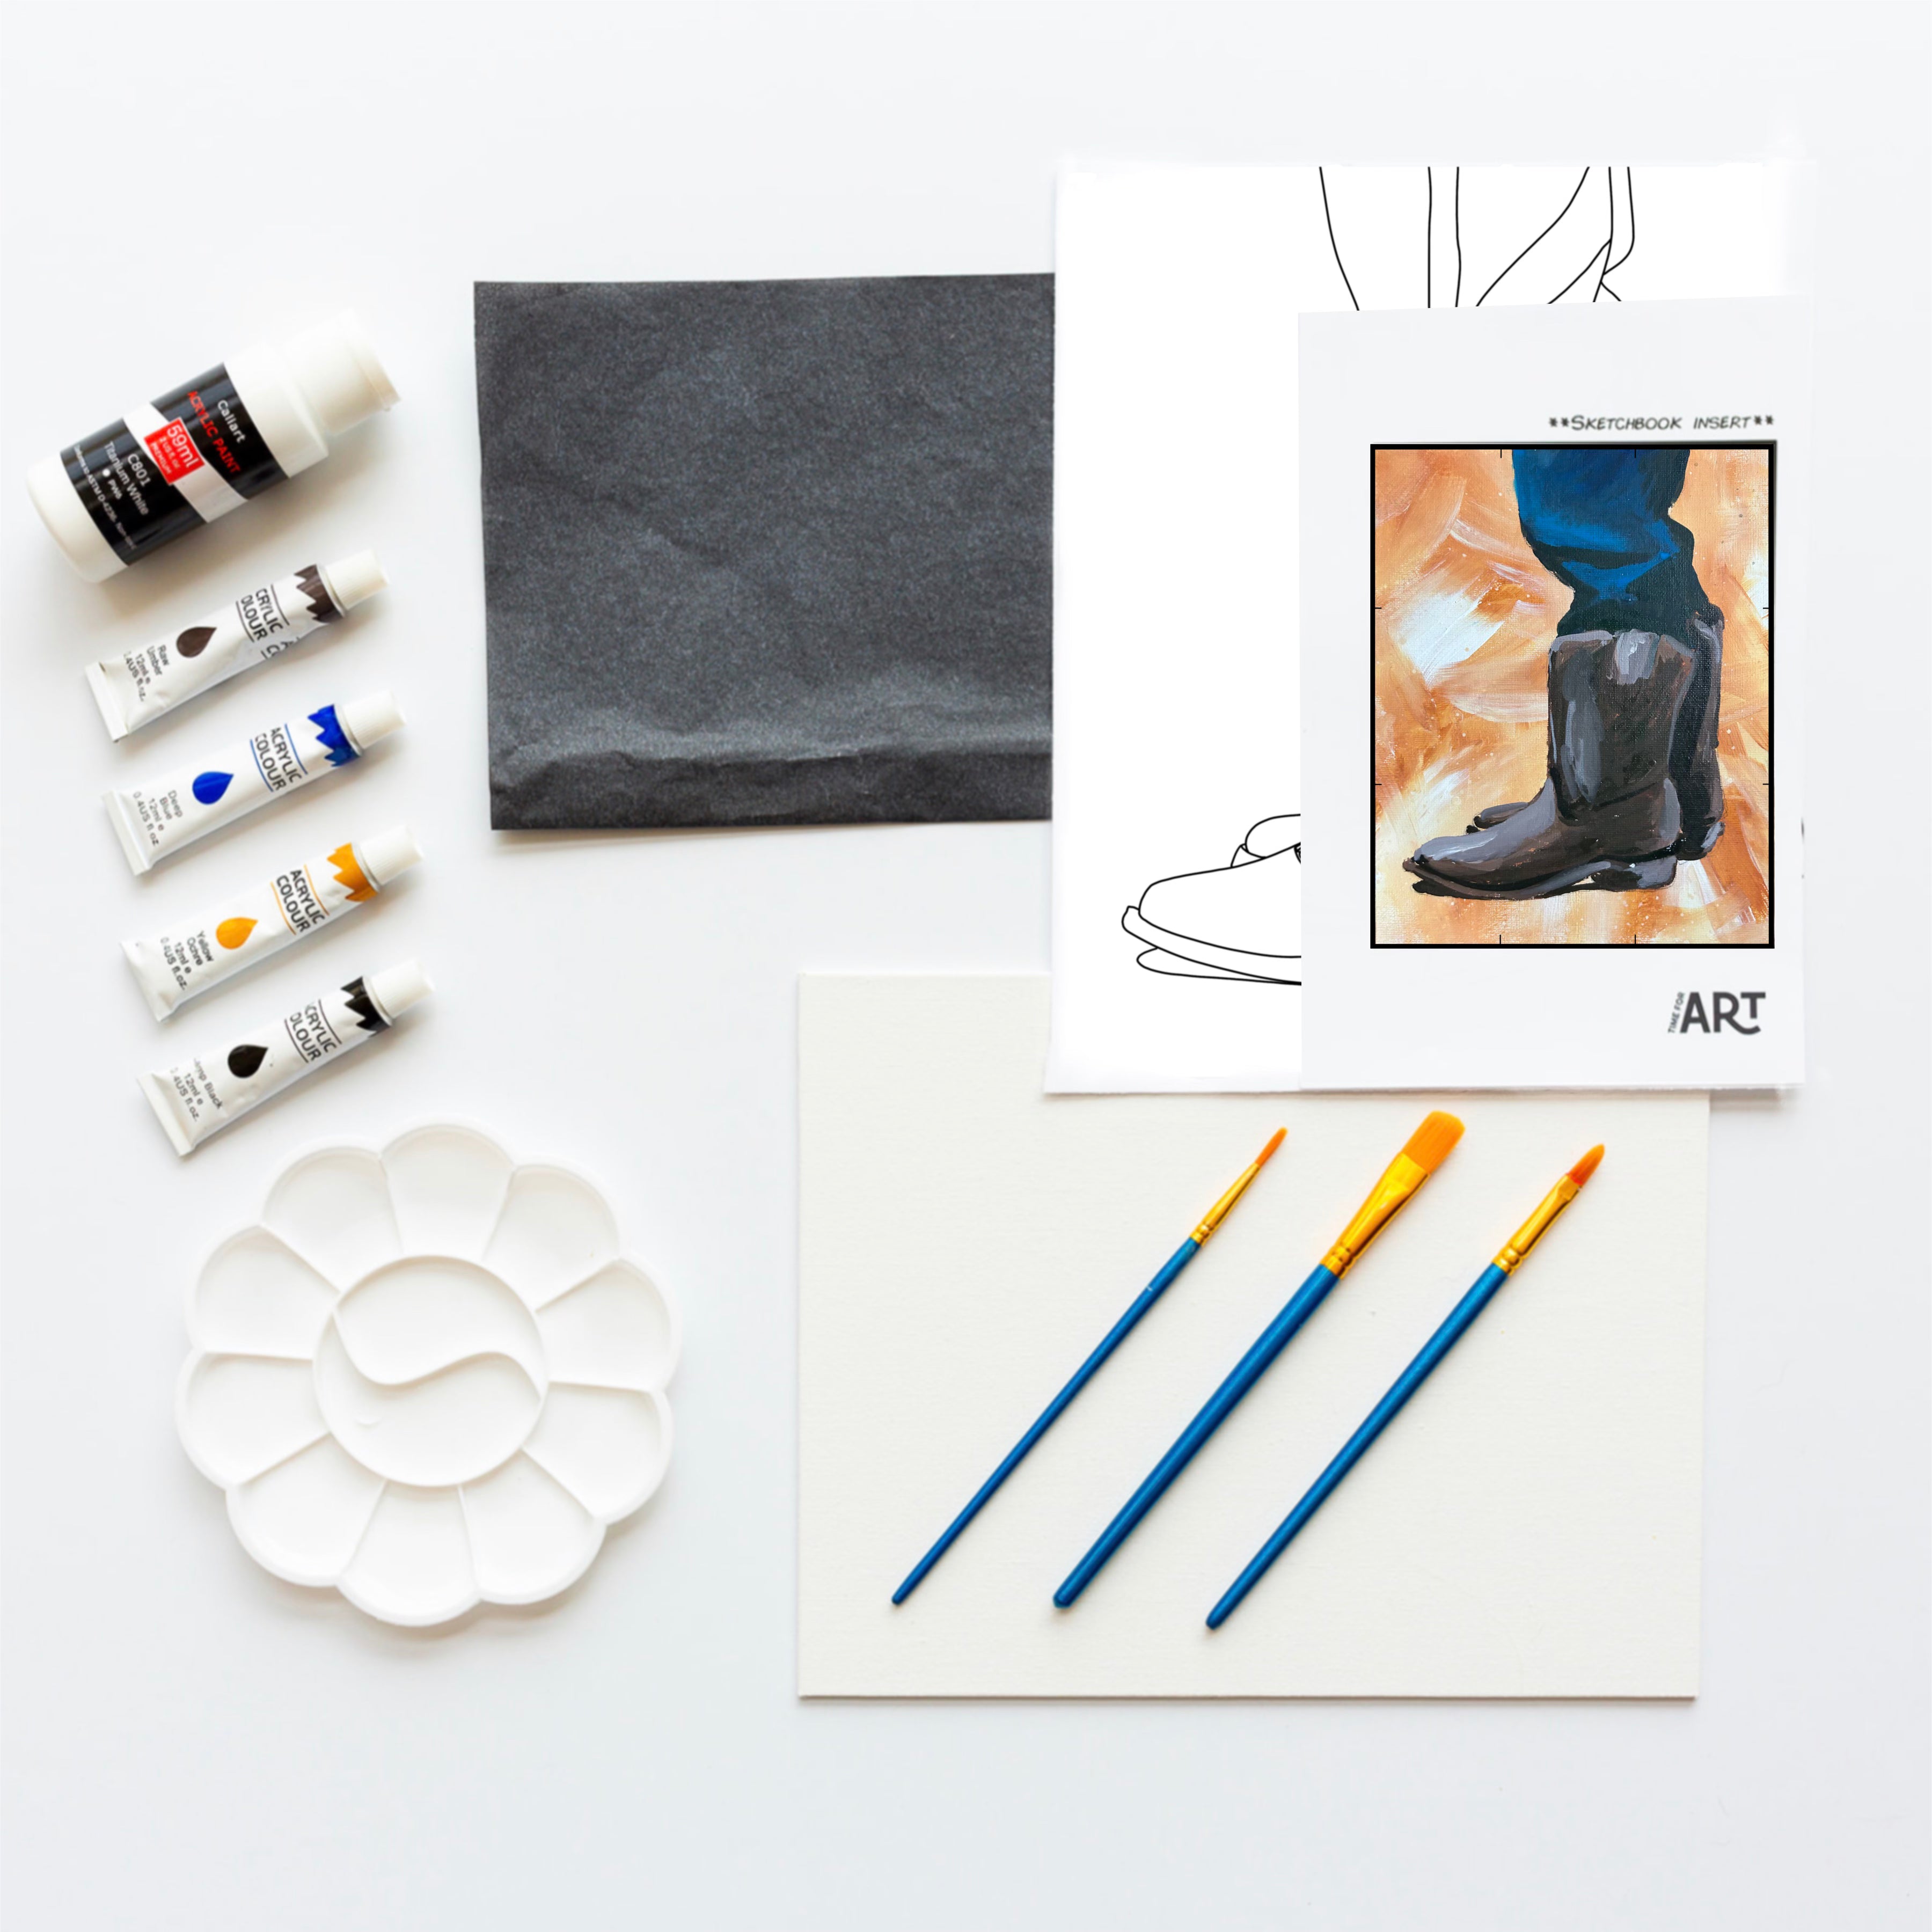 Whats included in the Cowboy Boots Painting Kit. 5 acrylic paints, painters pallet, brushes, canvas panel, traceable outline, and reference image.